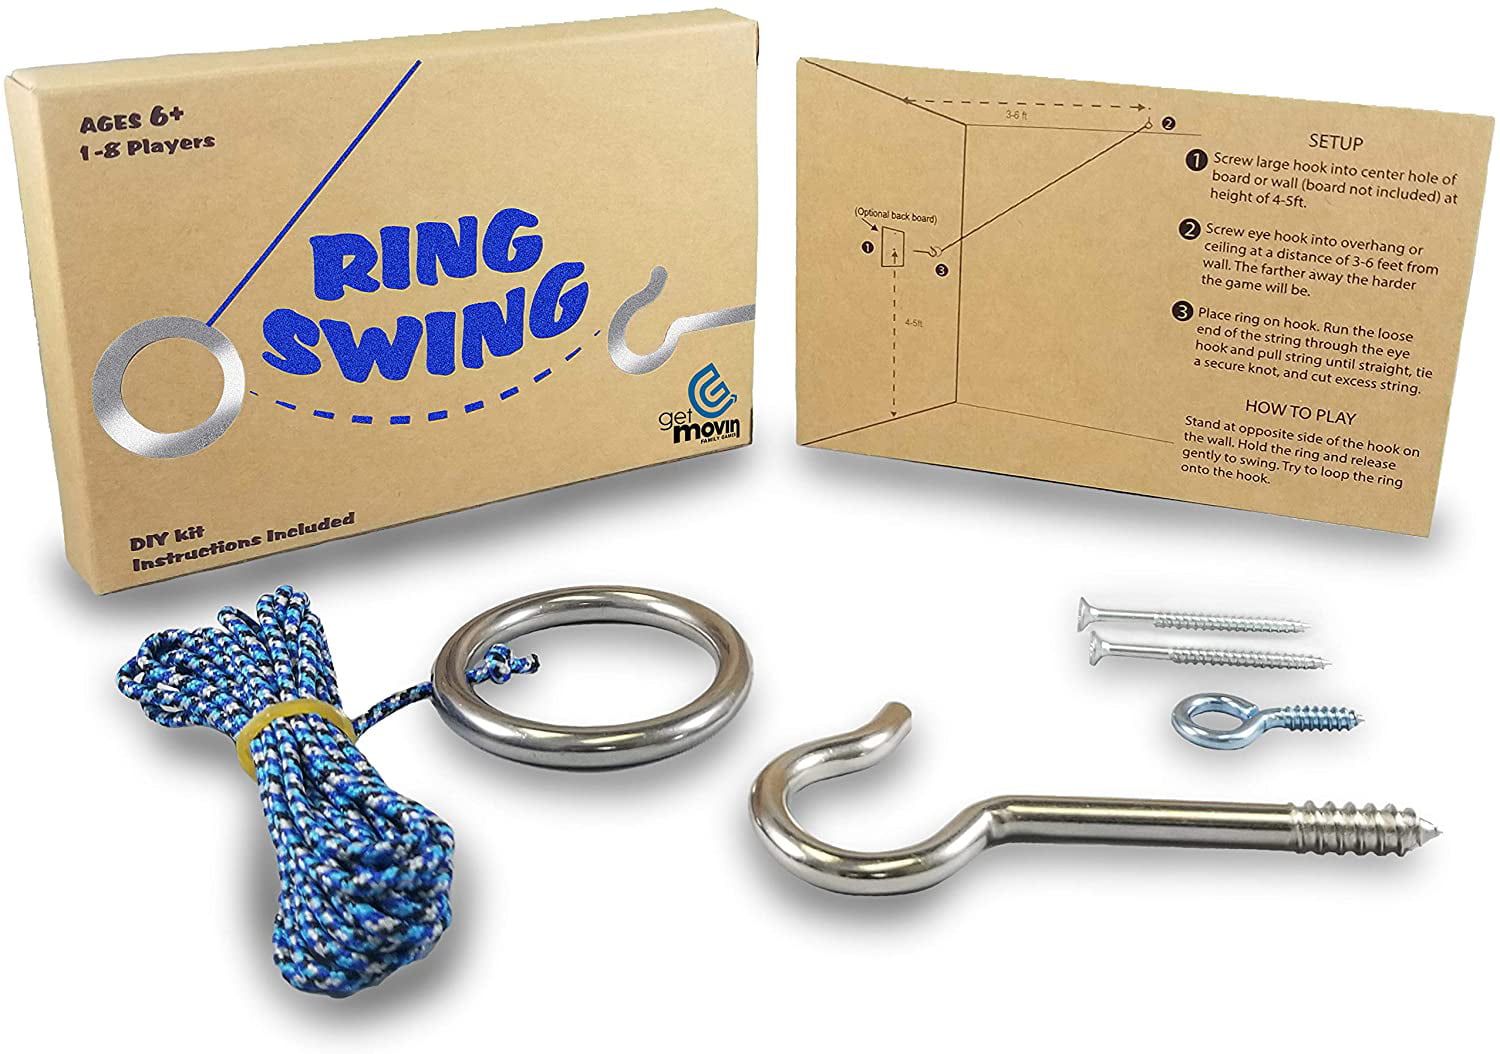 Outdoor for Endless Hours of Fun! GETMOVIN SPORTS Hook and Ring Swing DIY Kit Stainless Steel Hardware and Nylon String Ring Toss Game Indoor